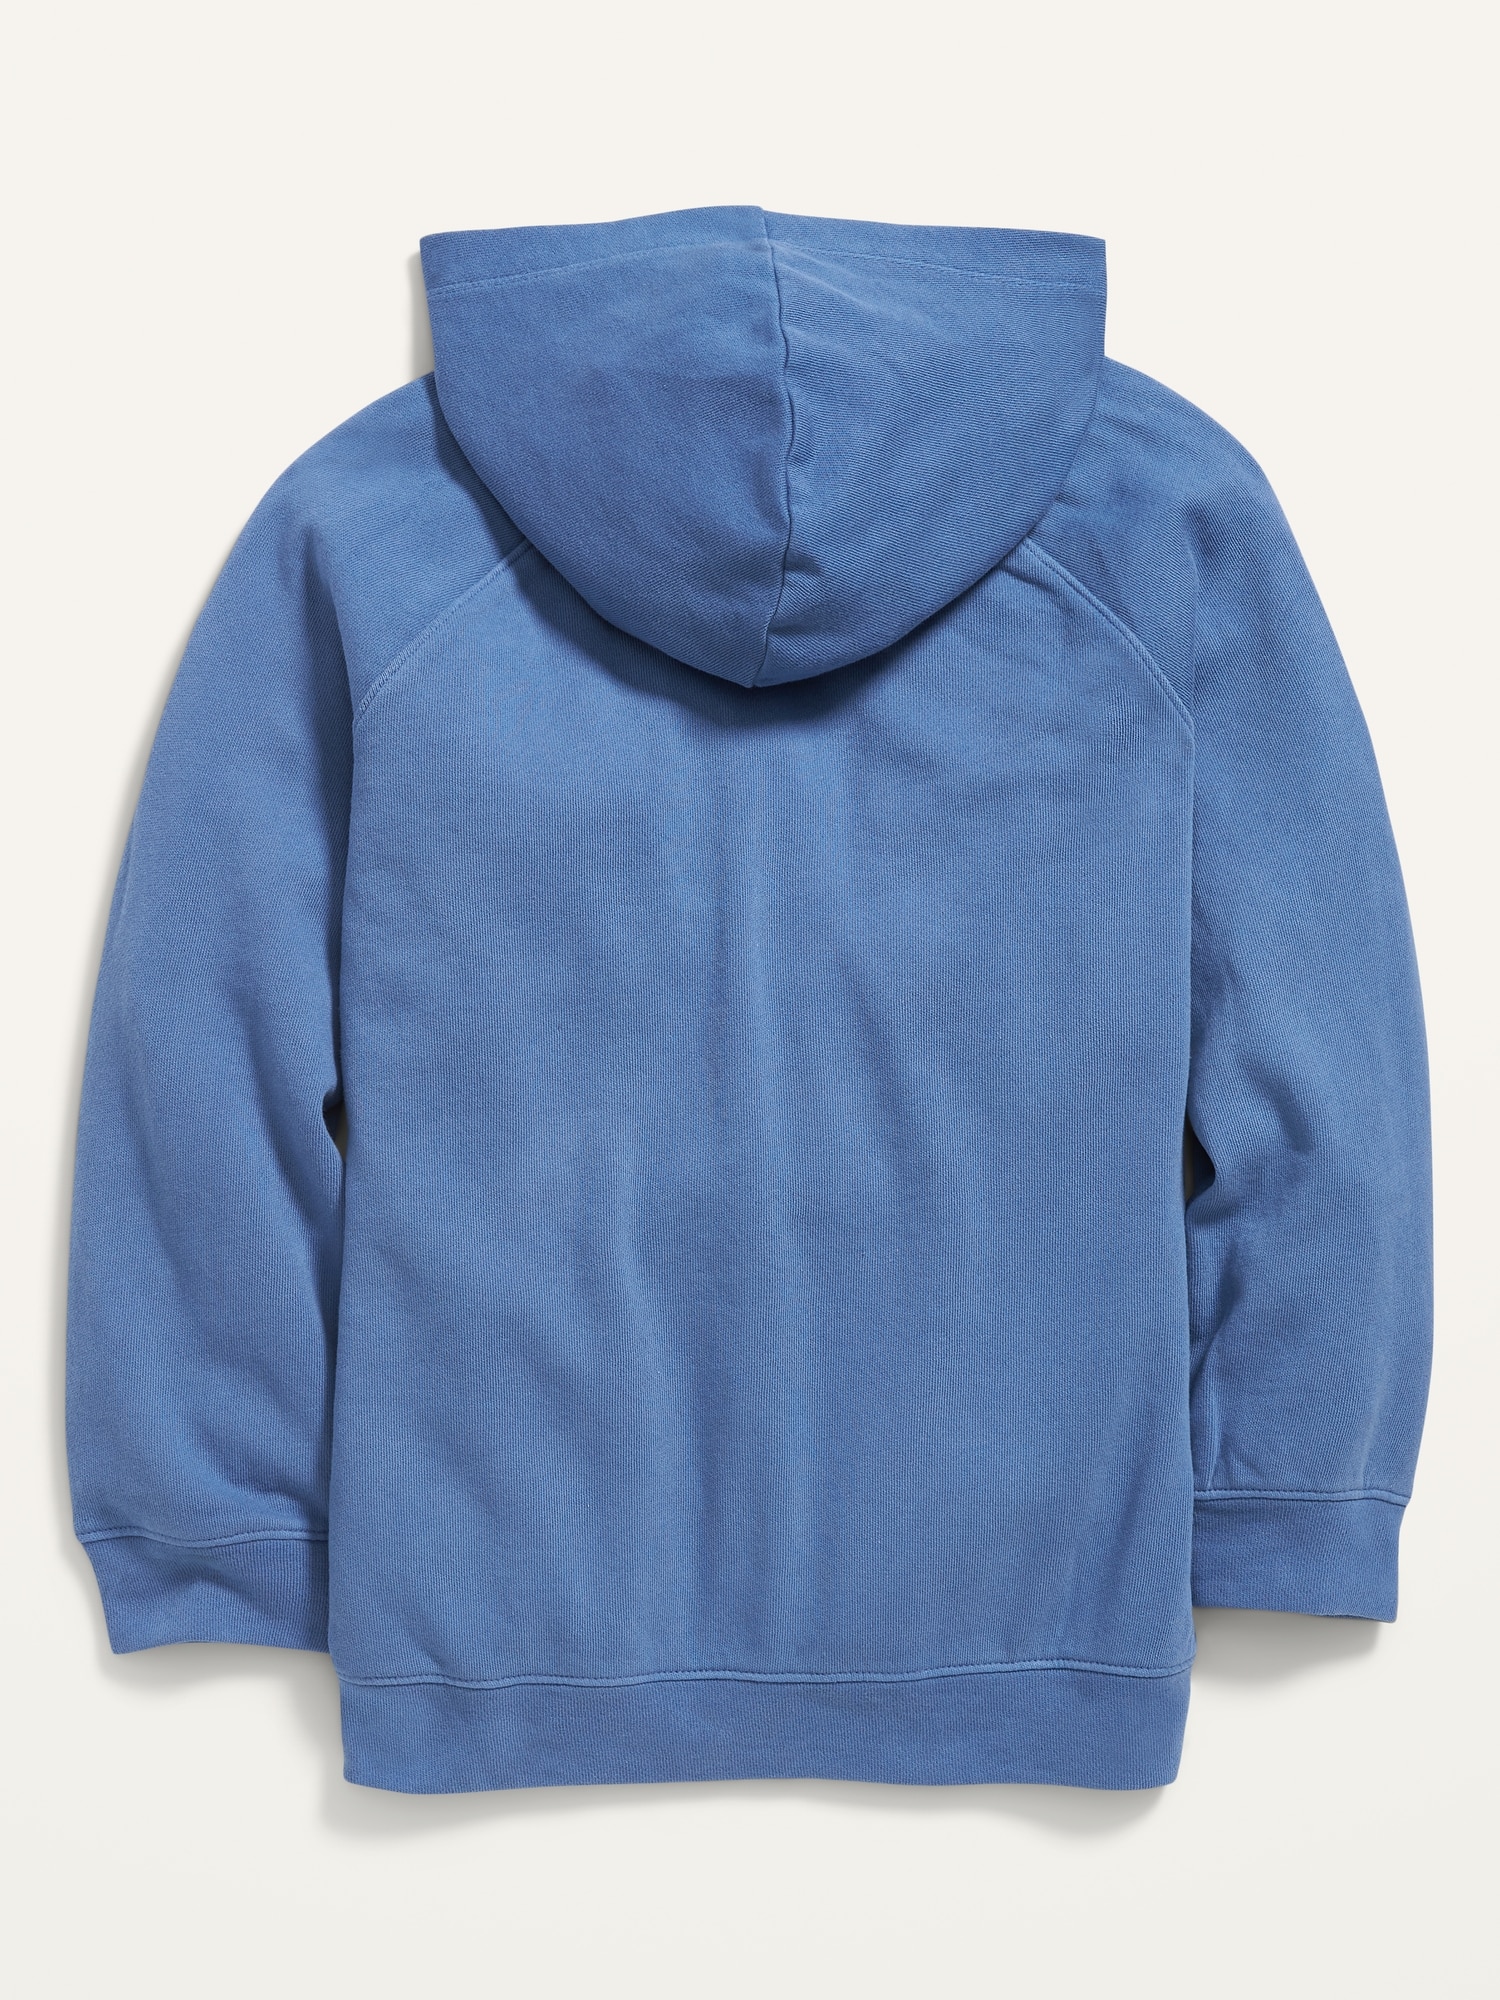 Old Navy Kids' French Terry Zip Tunic Hoodie - - Size L